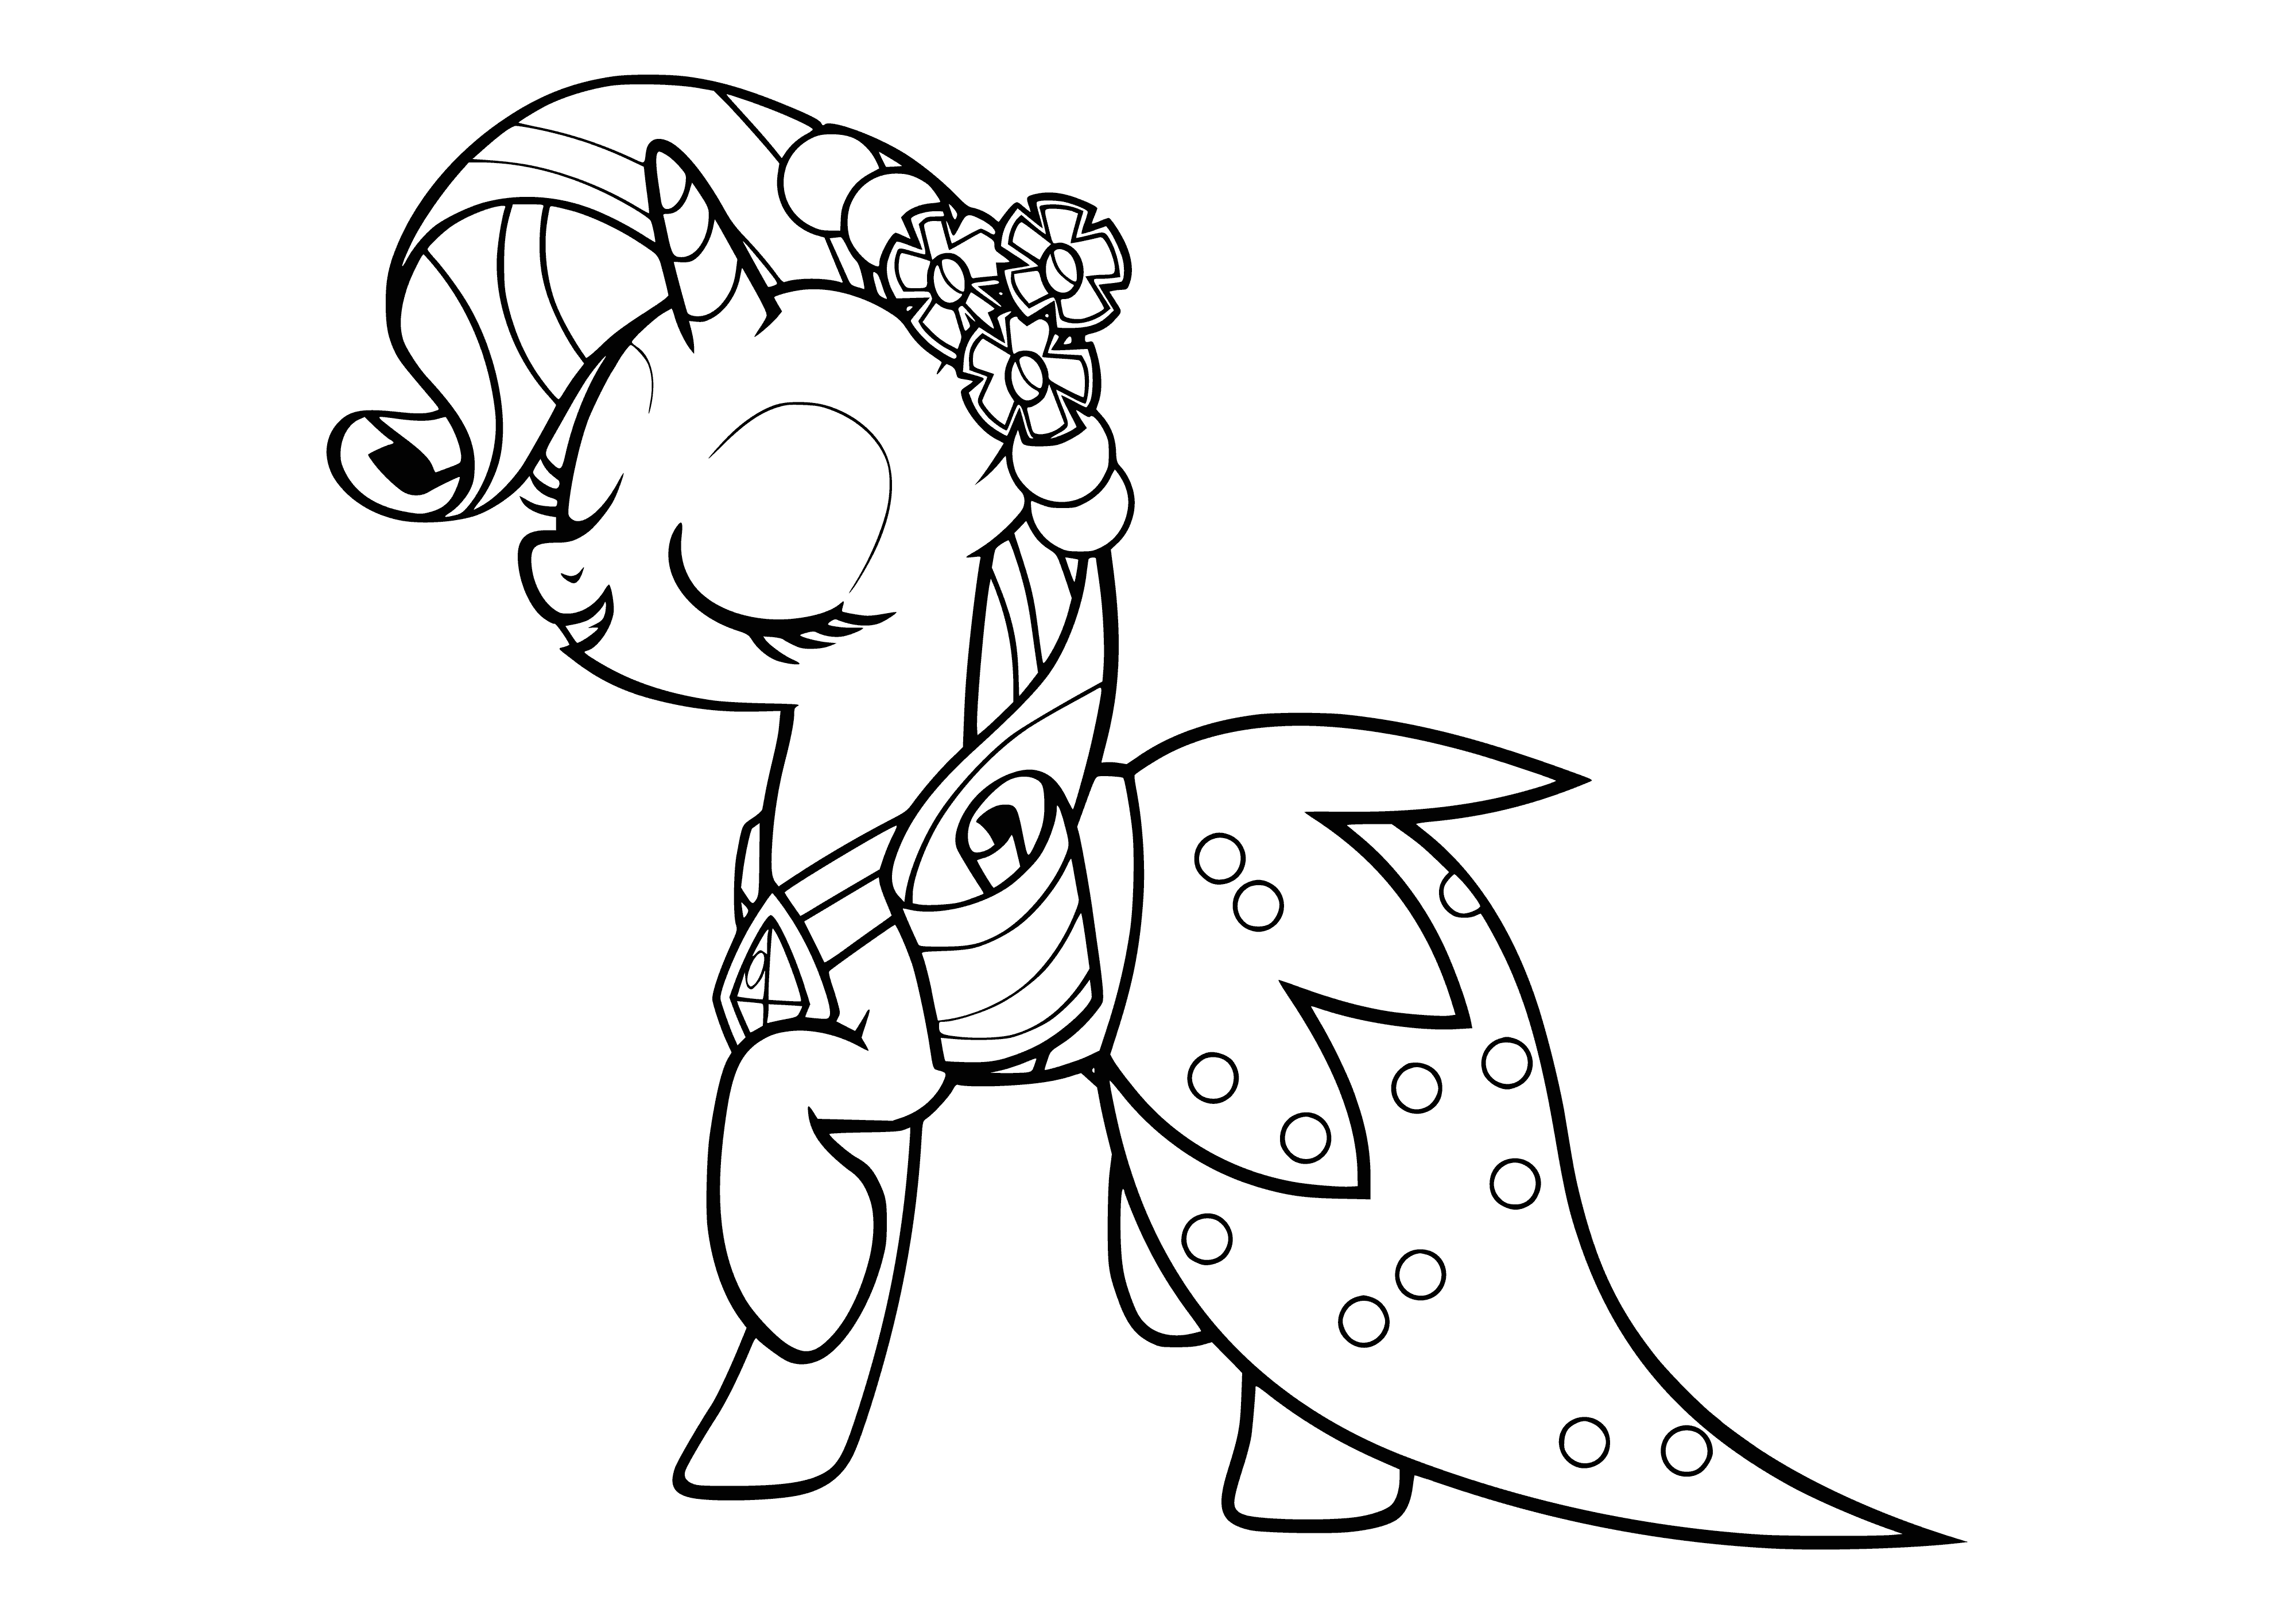 coloring page: Adorable white pony w/ flowing mane & tail, pink & purple diamonds on flank.